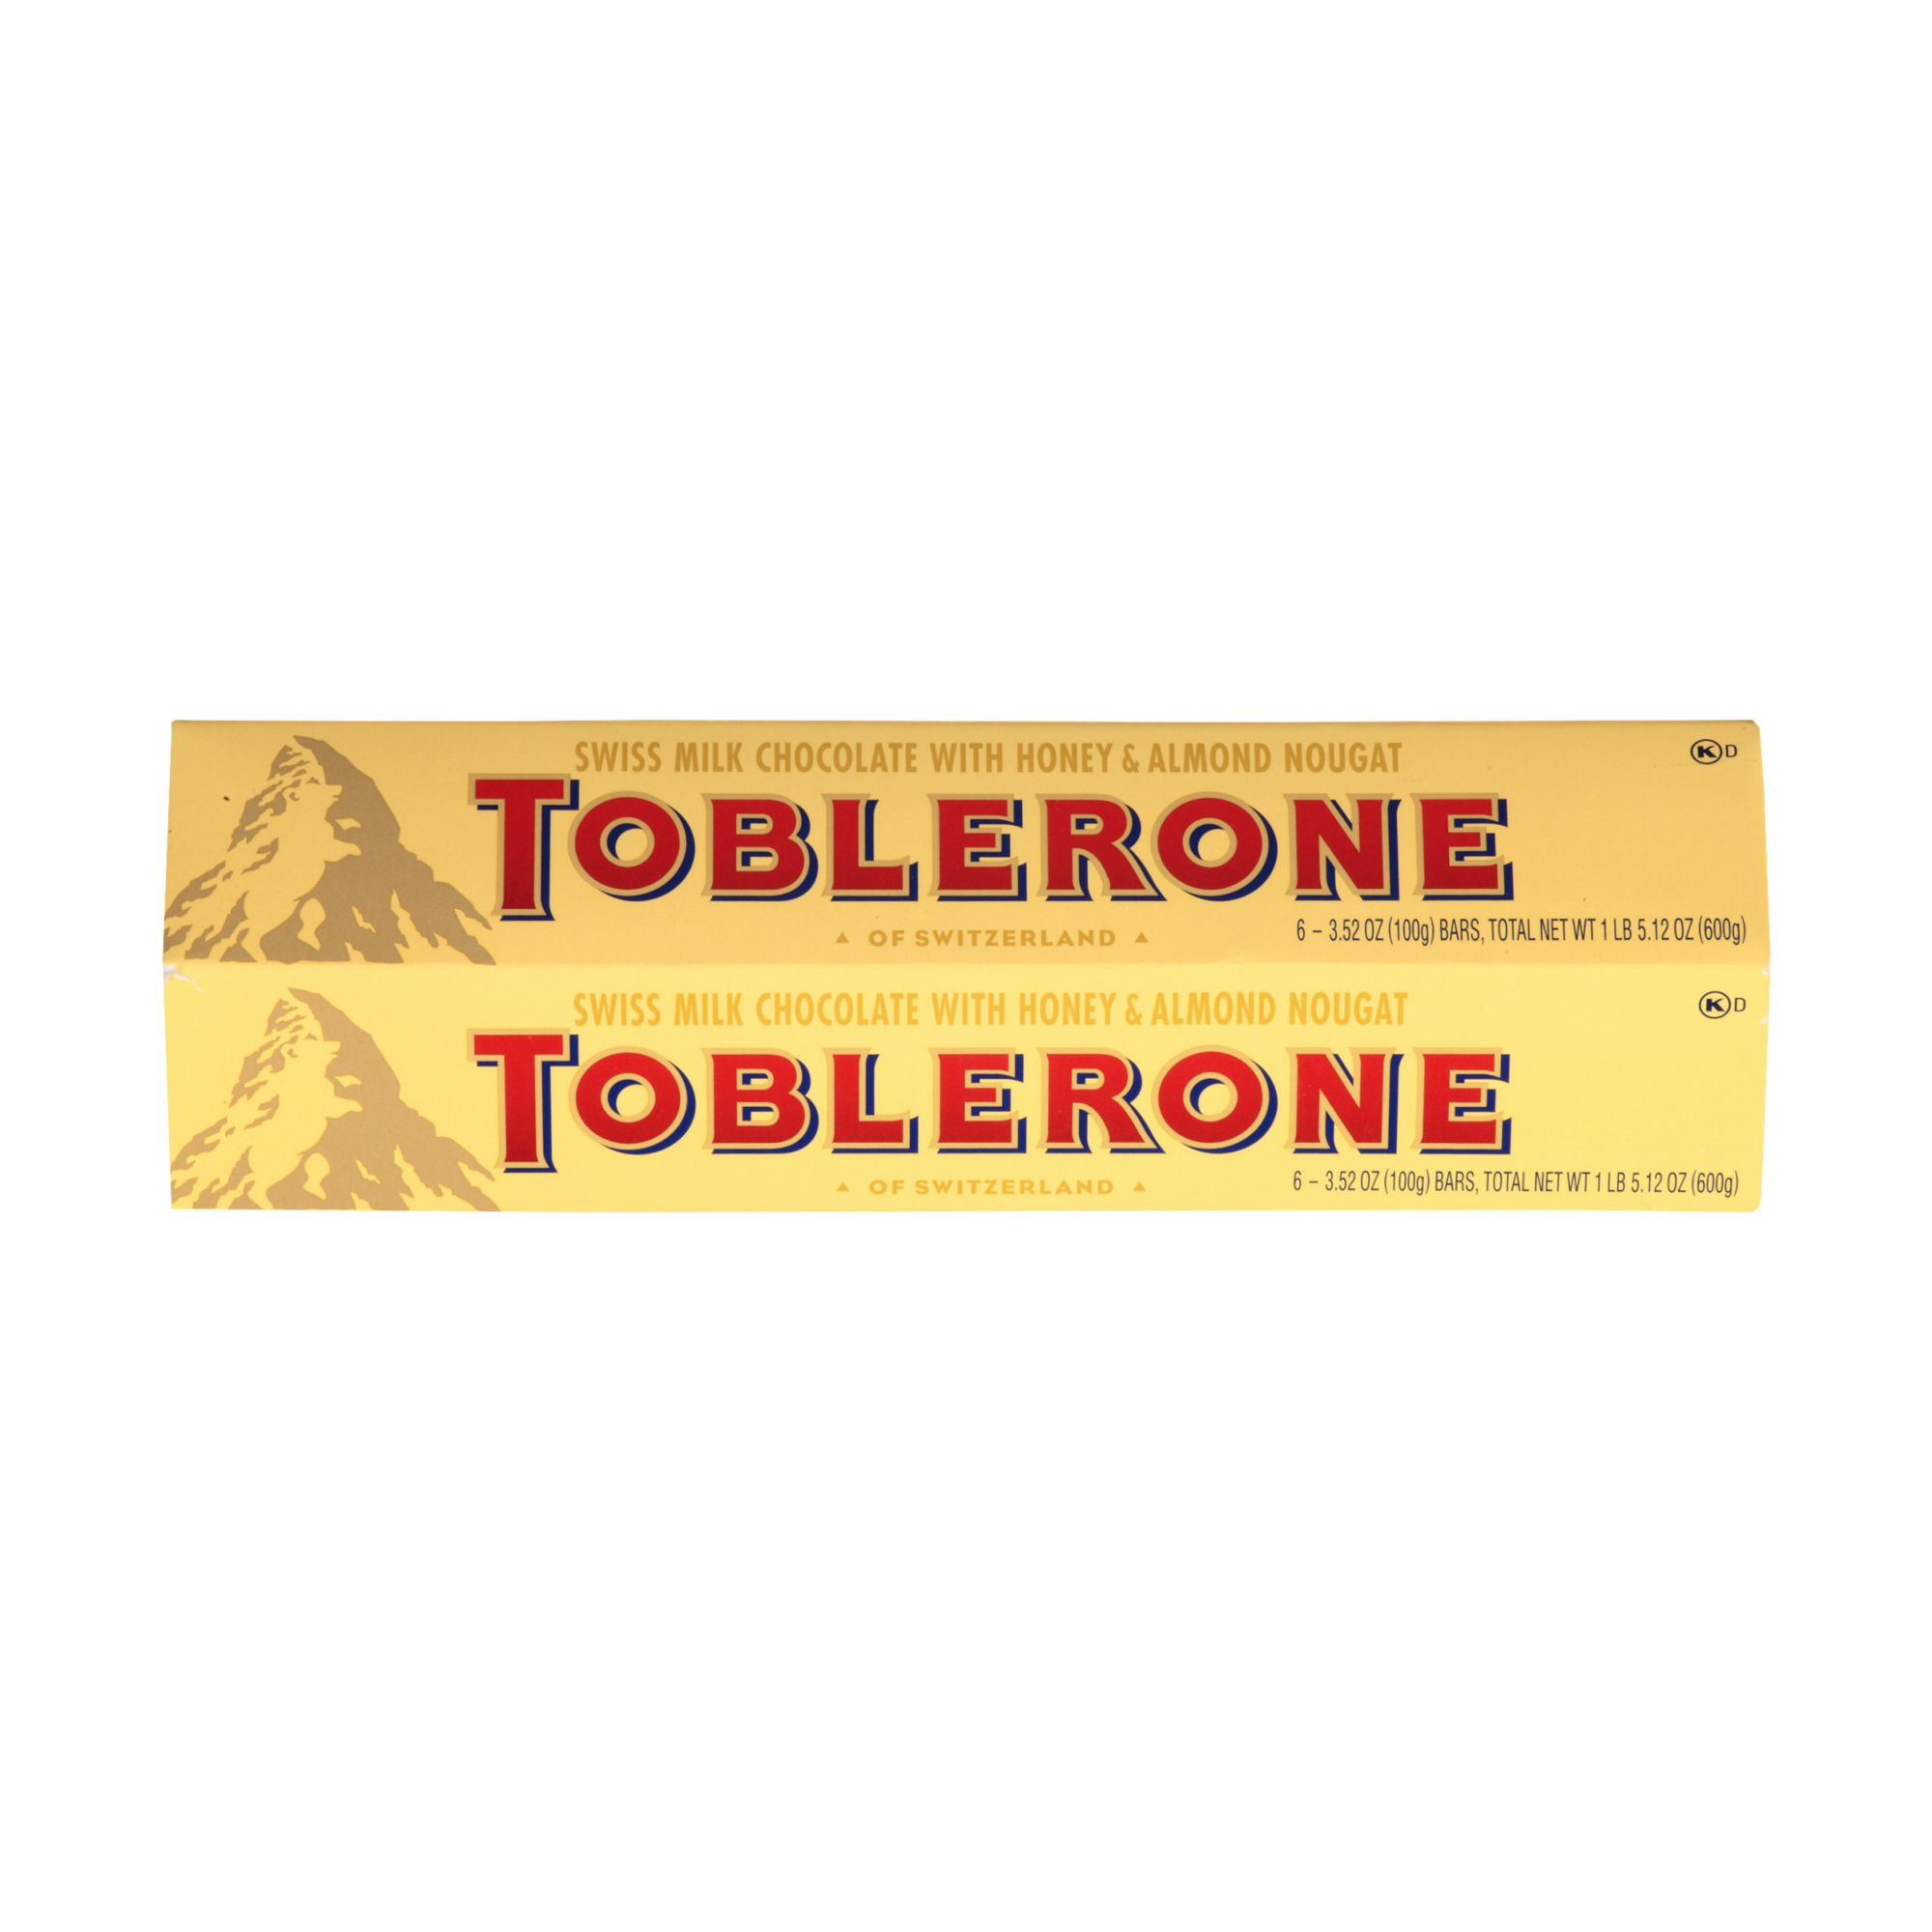 Toblerone, White chocolate 100g, made by Toblerone - chocolate from